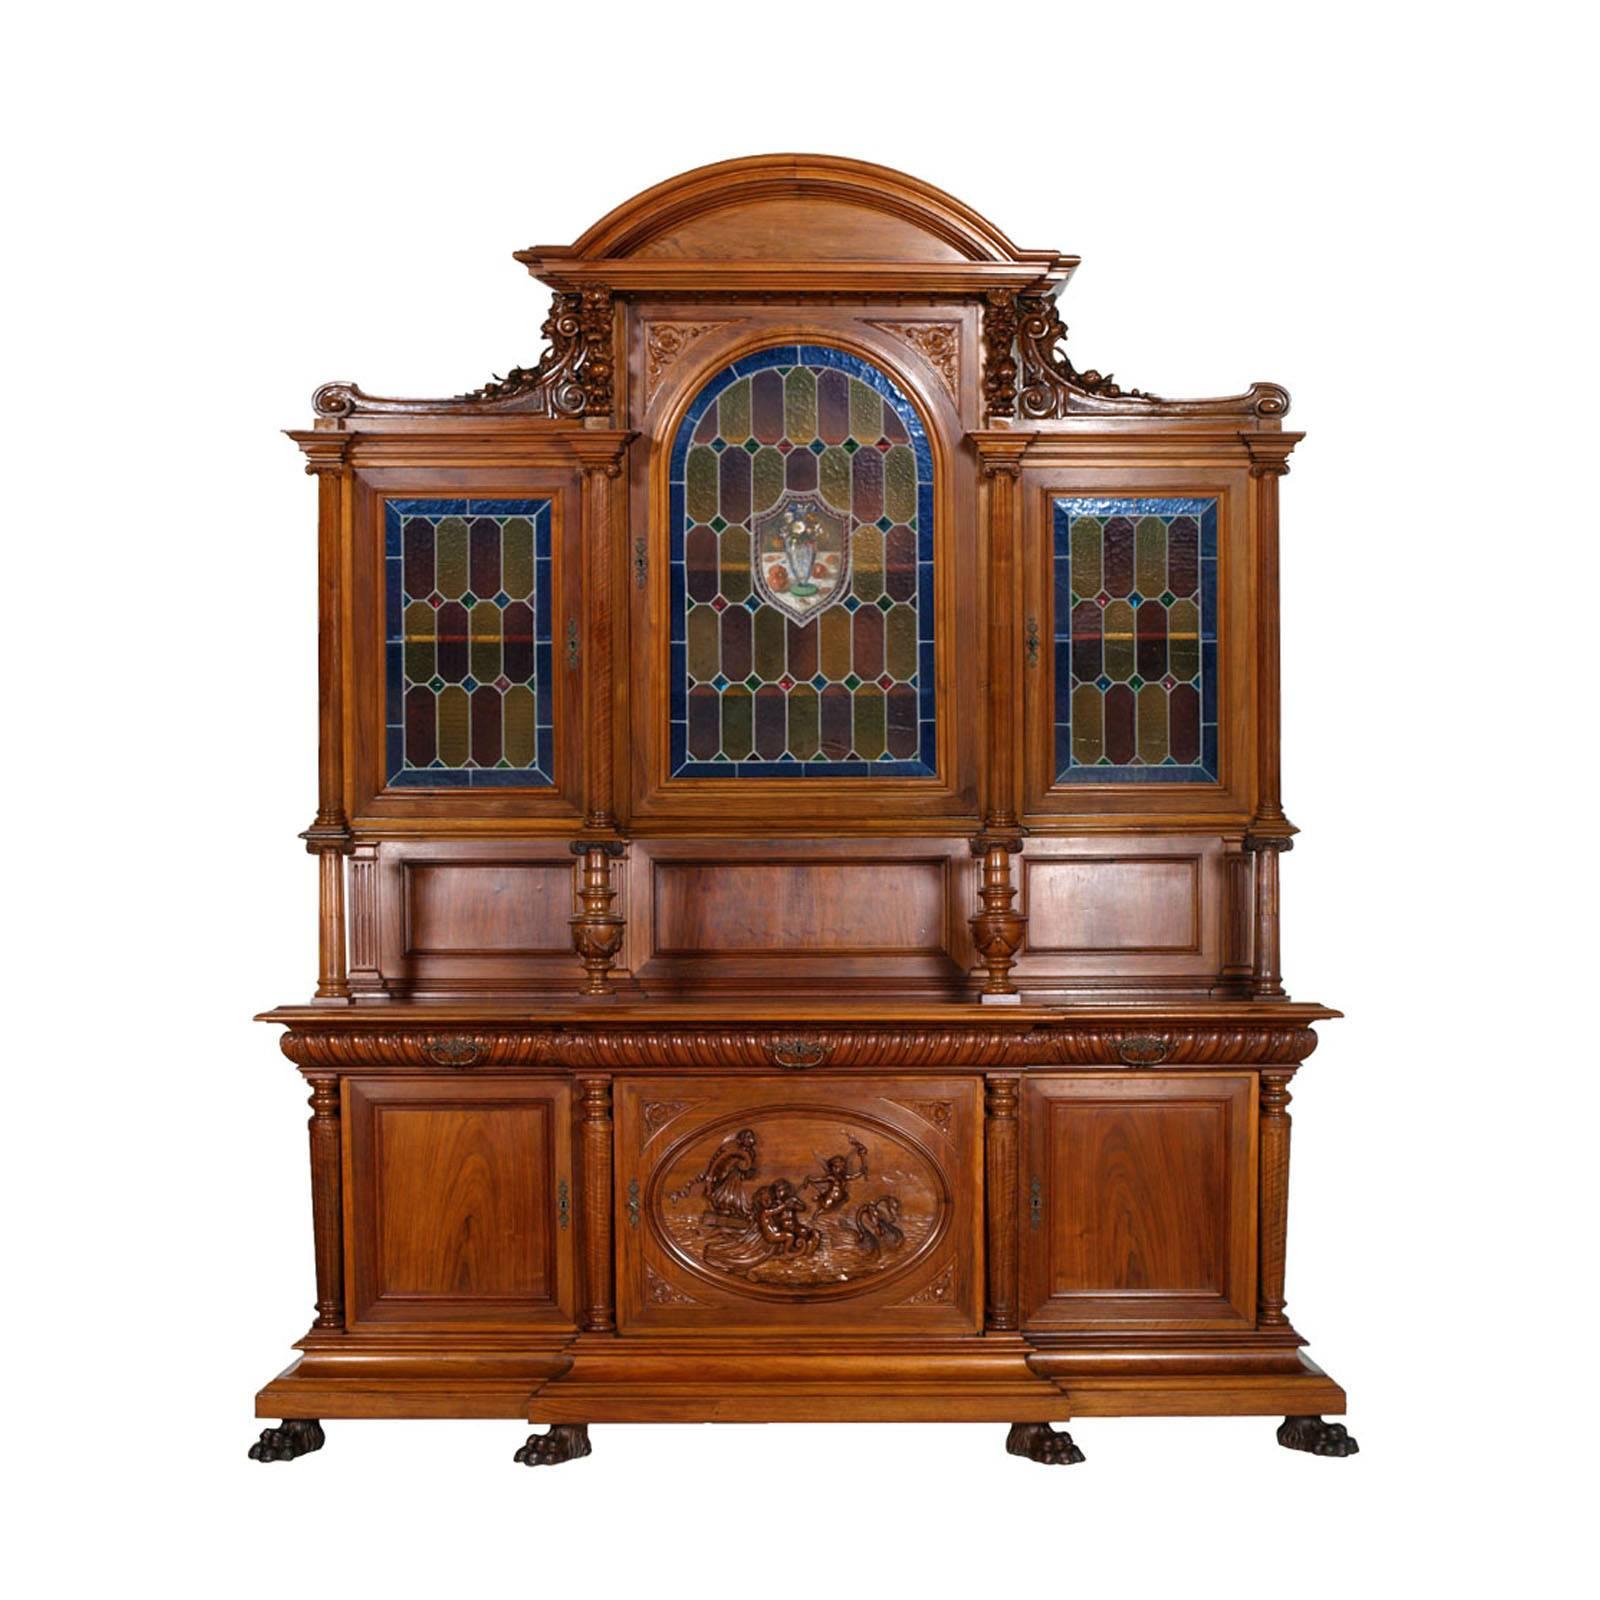 Code: FQ58
Period: 19th century 
Style: Renaissance 
Dining room of the School of Arts in Monza, 19th century, walnut hand-carved consists of:
sideboard showcase with leaded cathedral glass; 
sideboard with central mirror; 
console with large